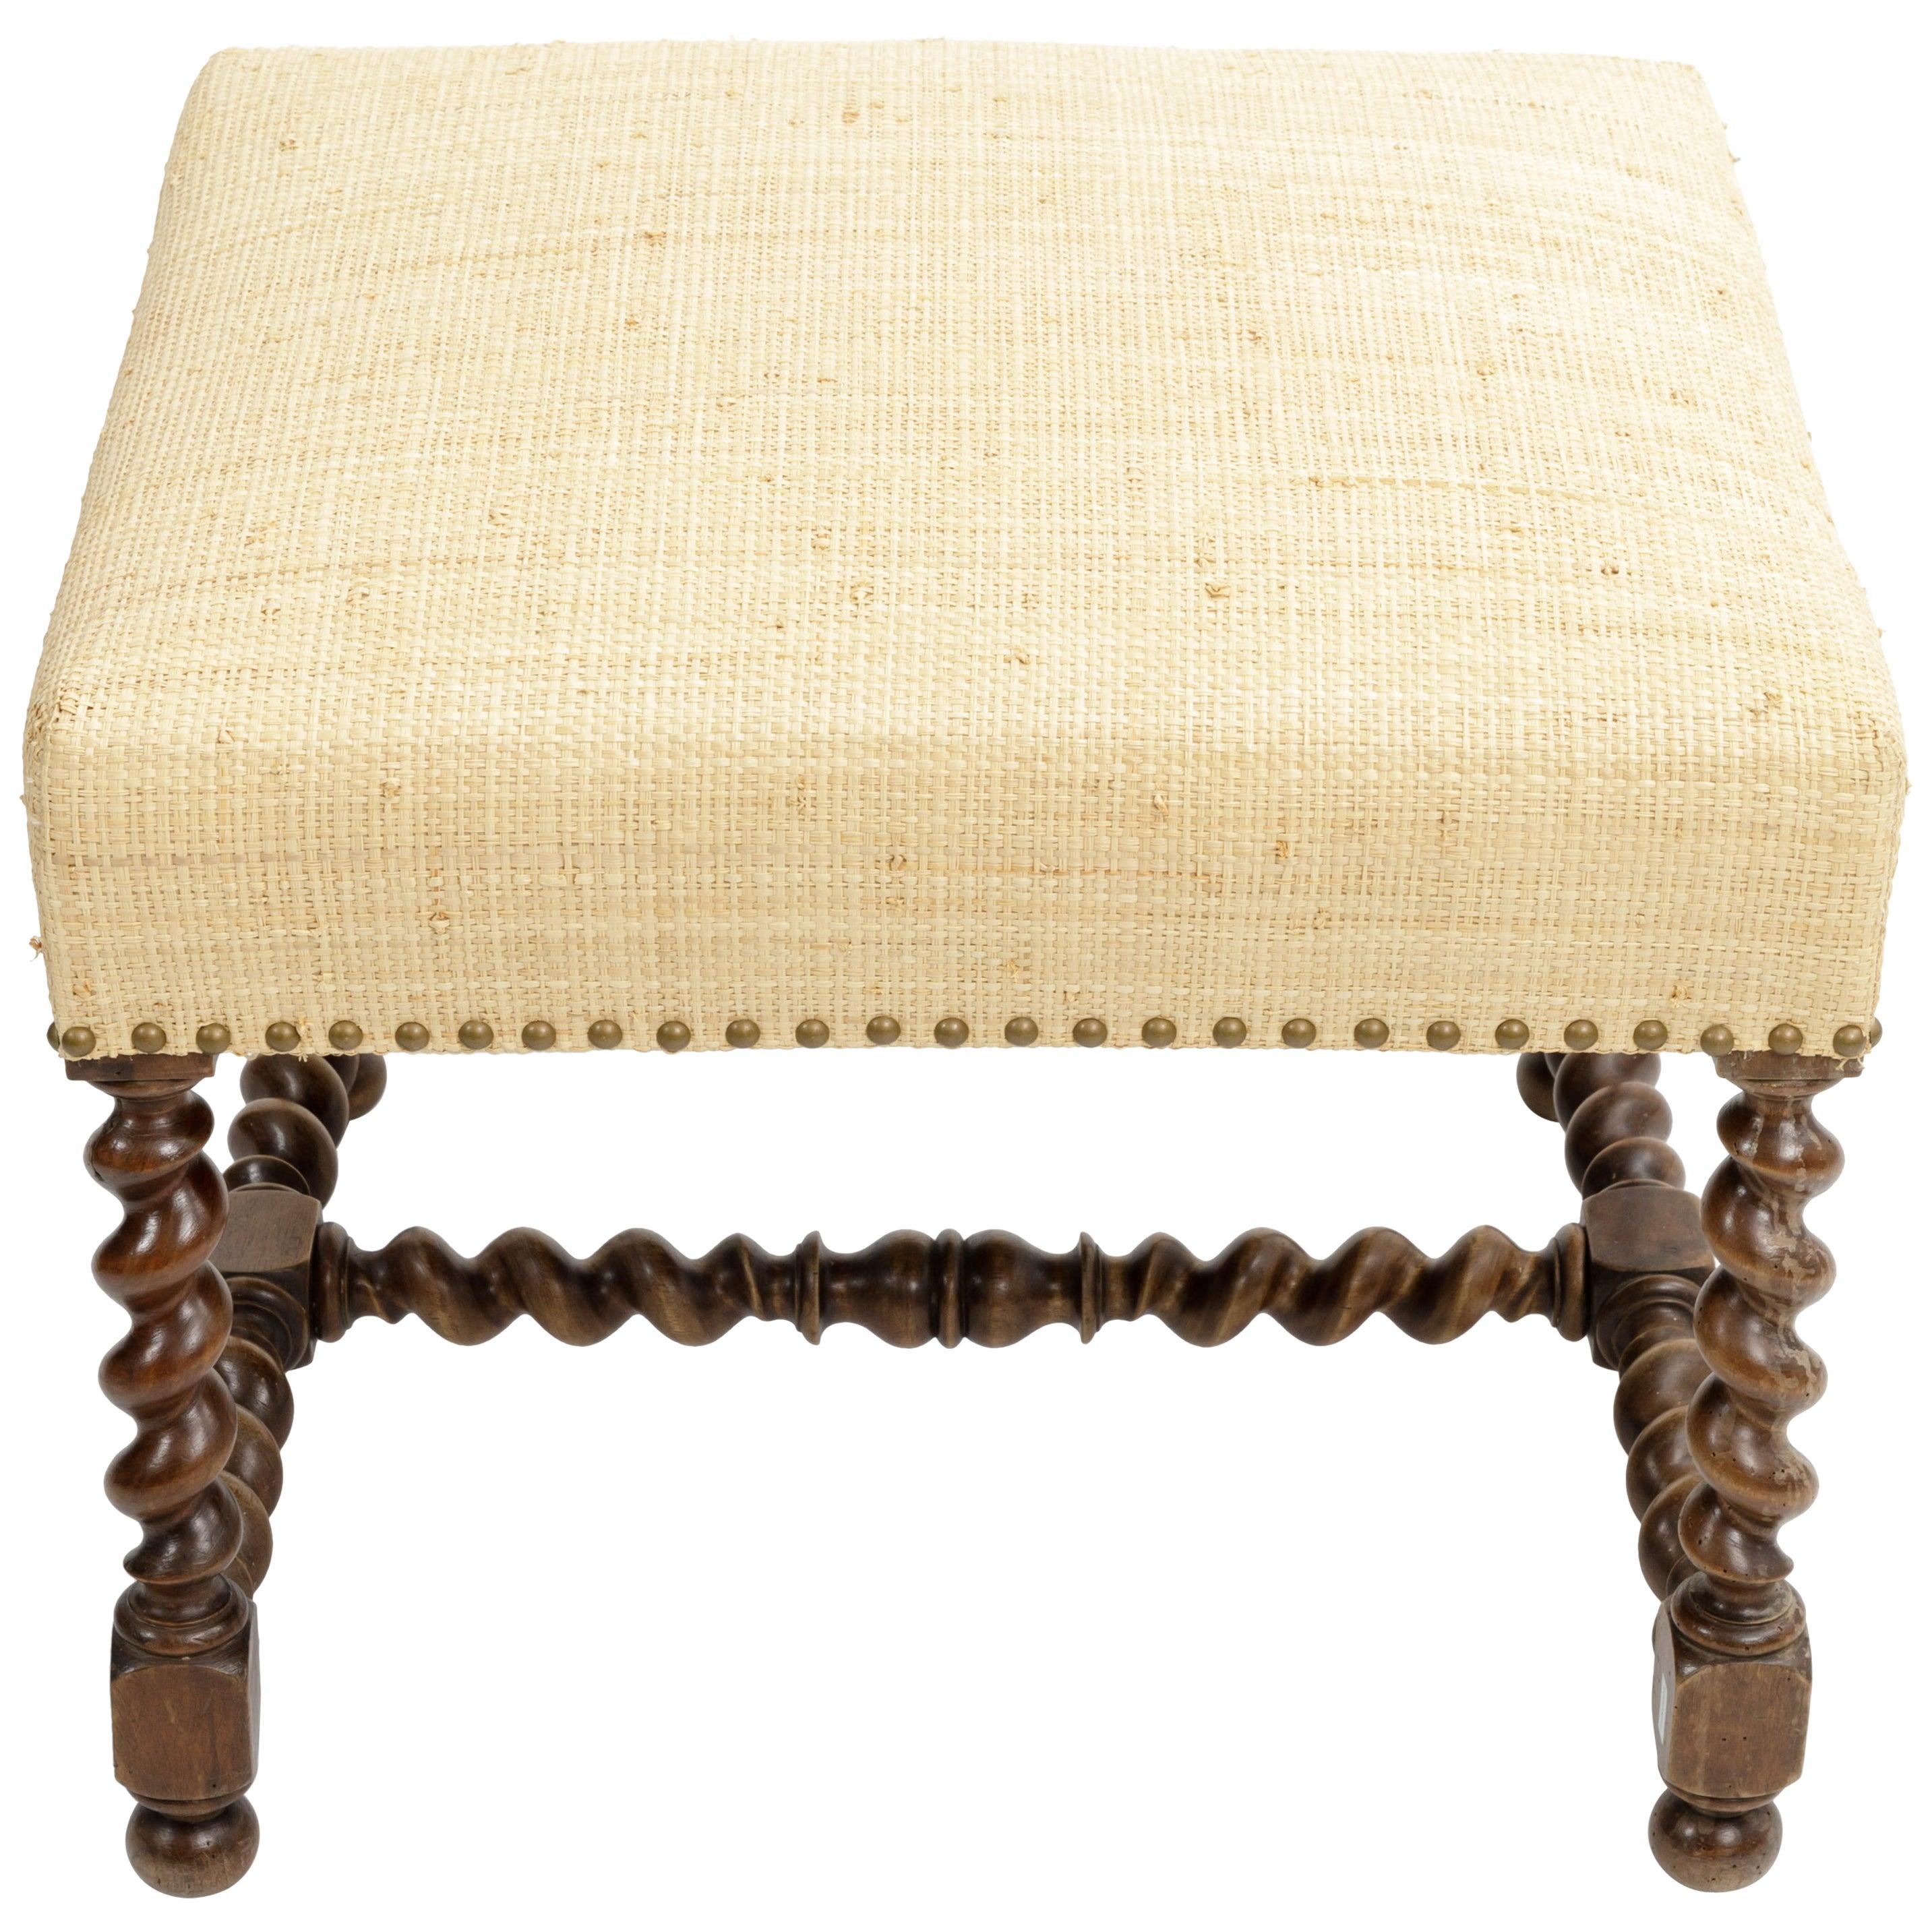 Antique Barley Twist Stool with Cream Linen Upholstery, Europe, 19th Century For Sale